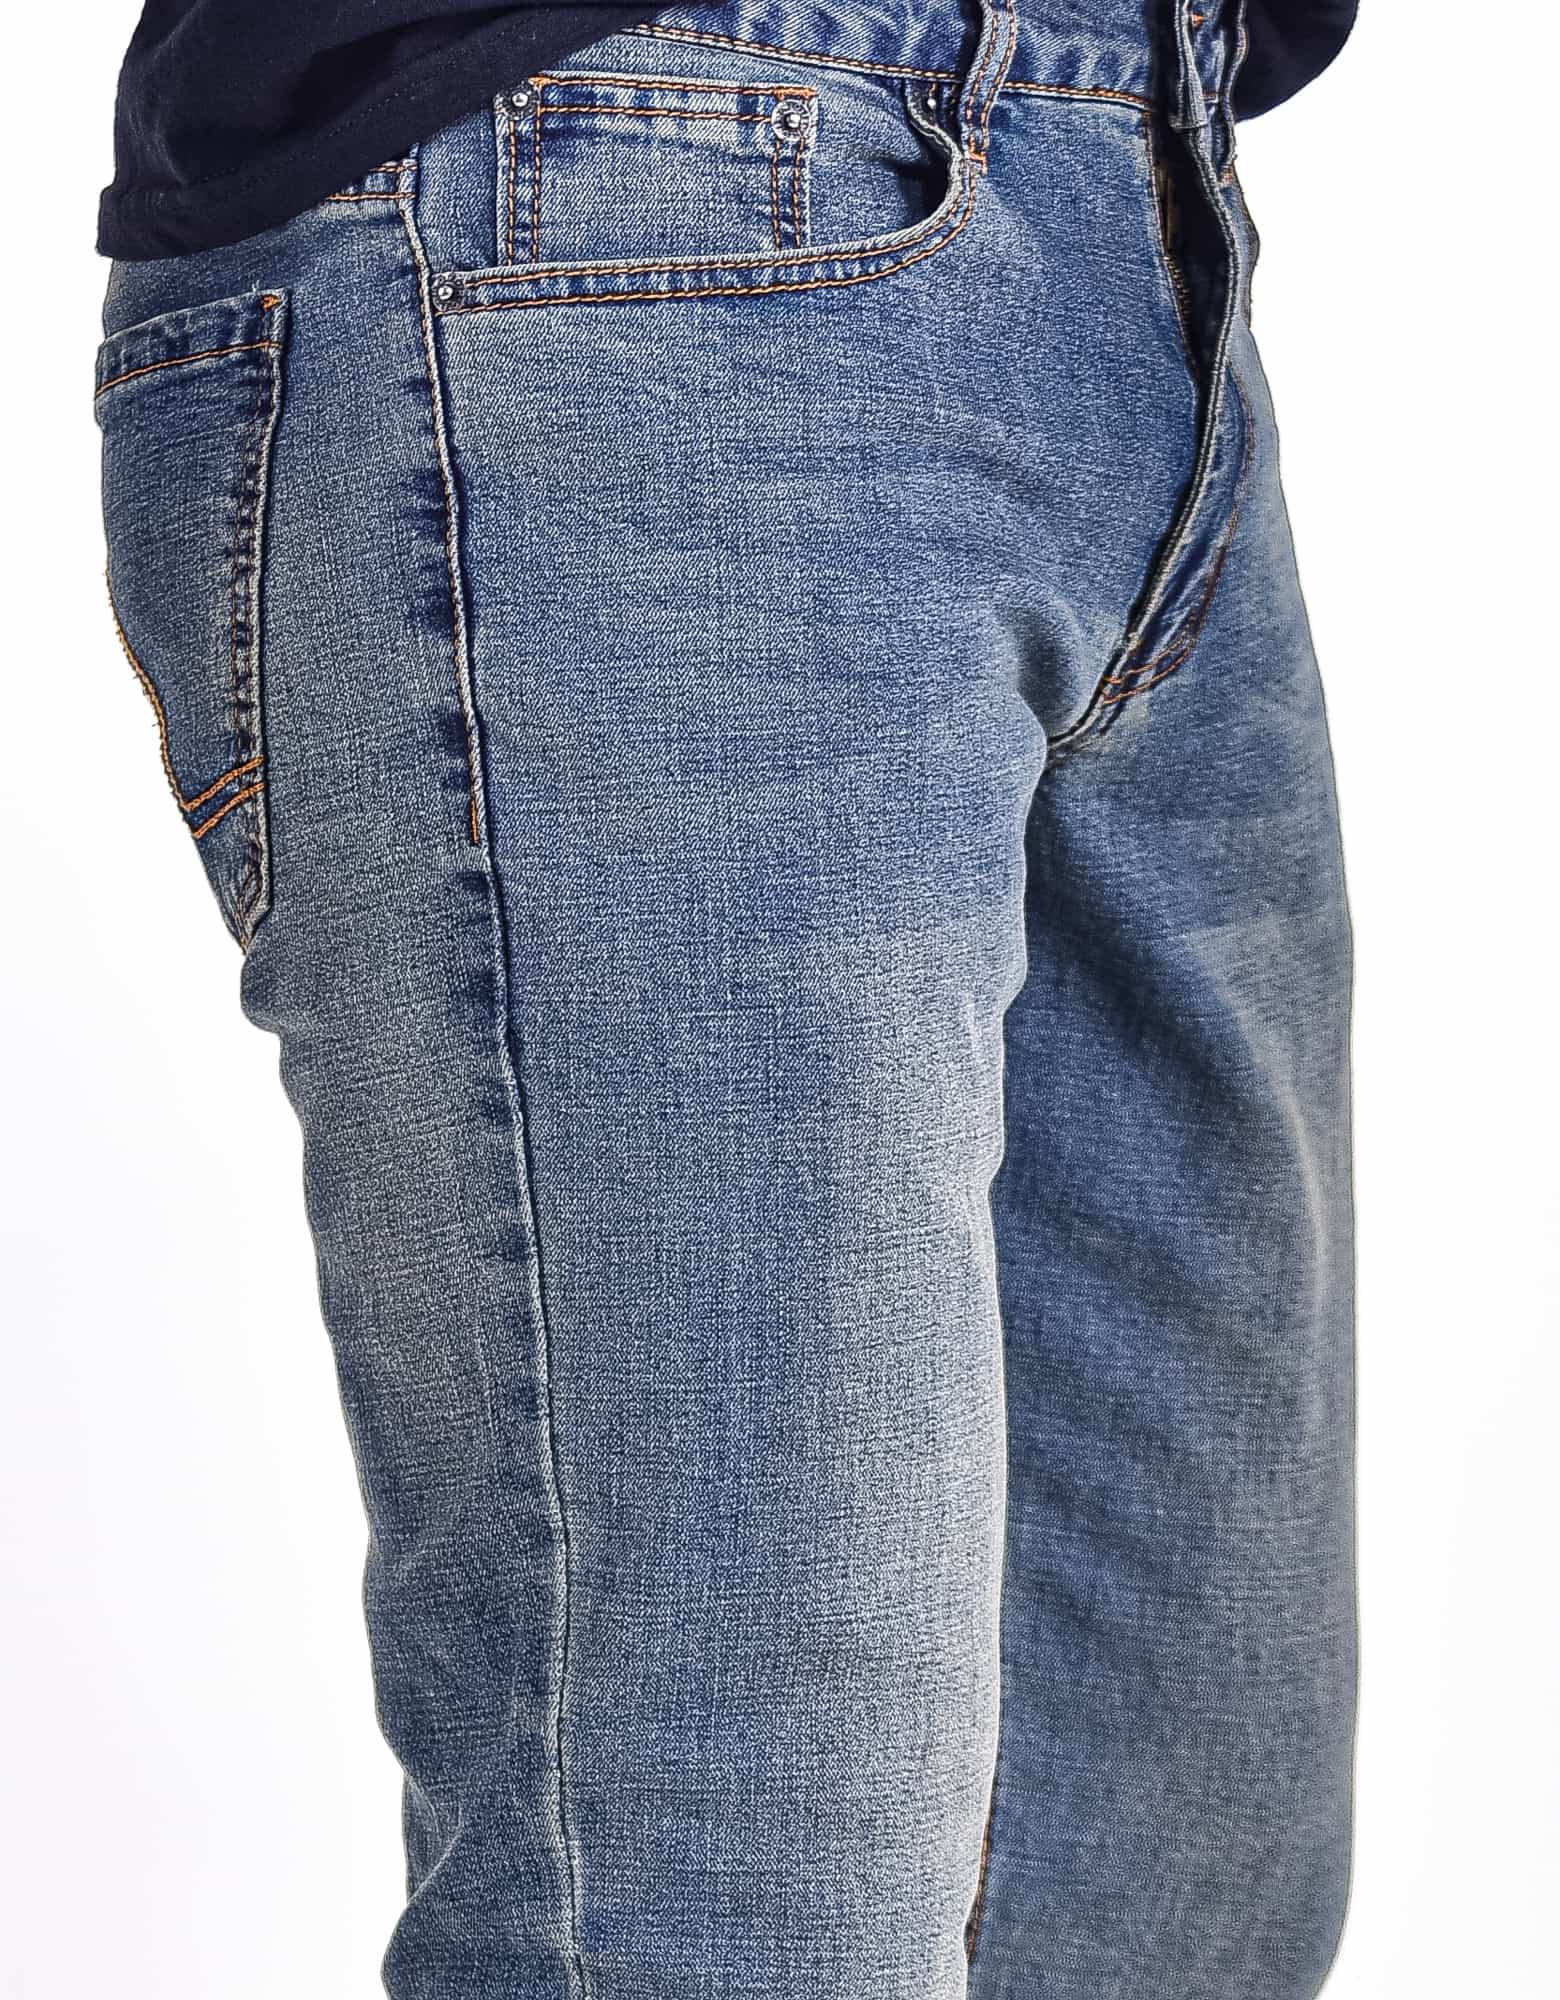 Men’s Twiggy Skinny Fit Jeans | Ring Of Fire Clothing